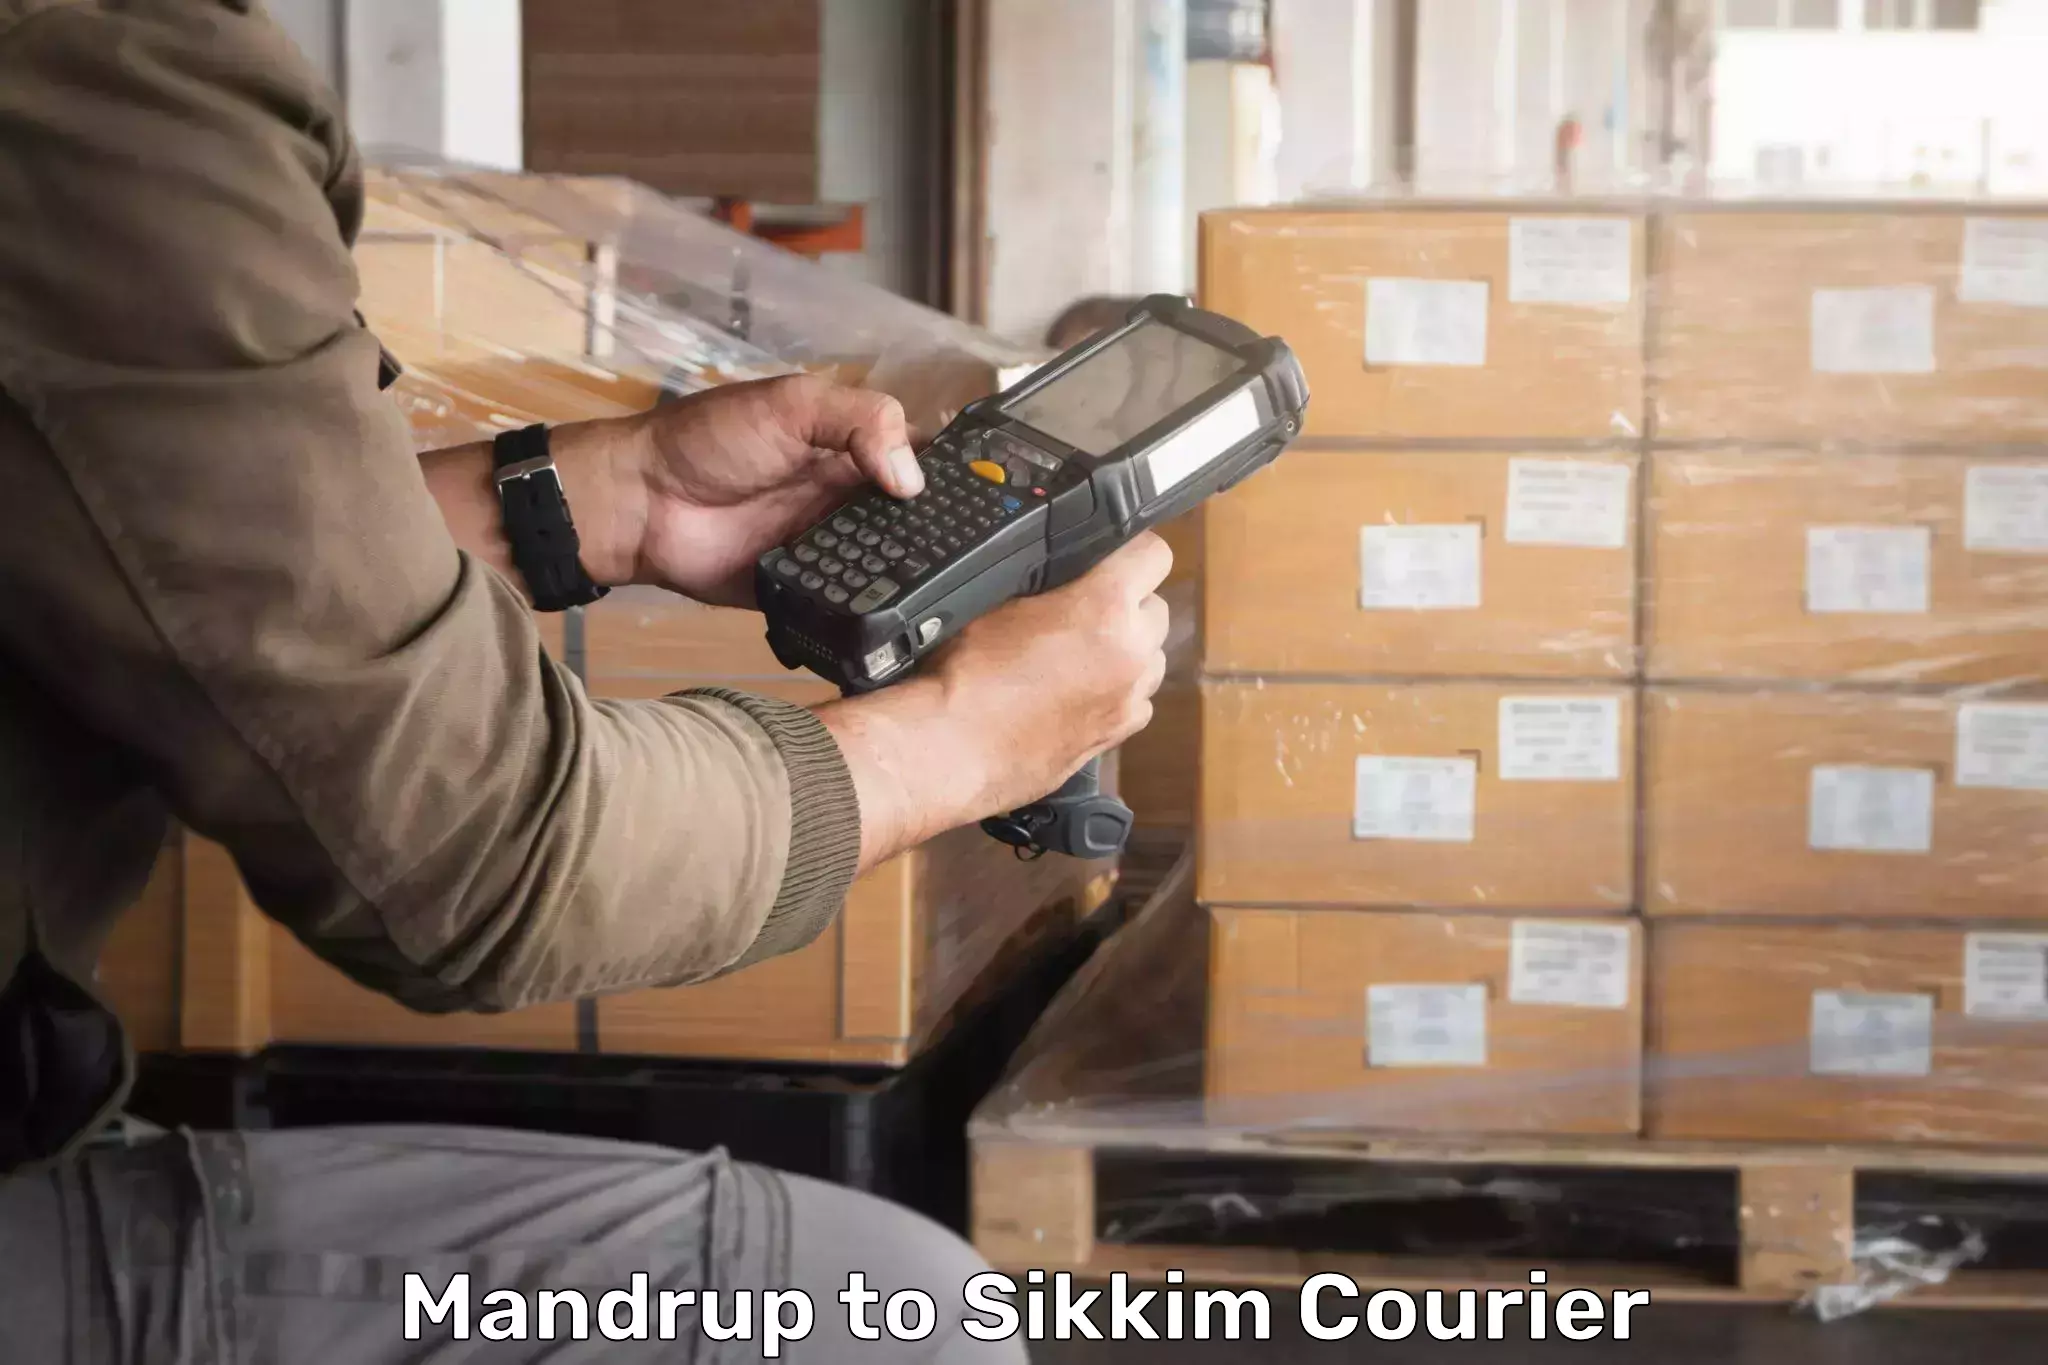 Advanced tracking systems Mandrup to Sikkim